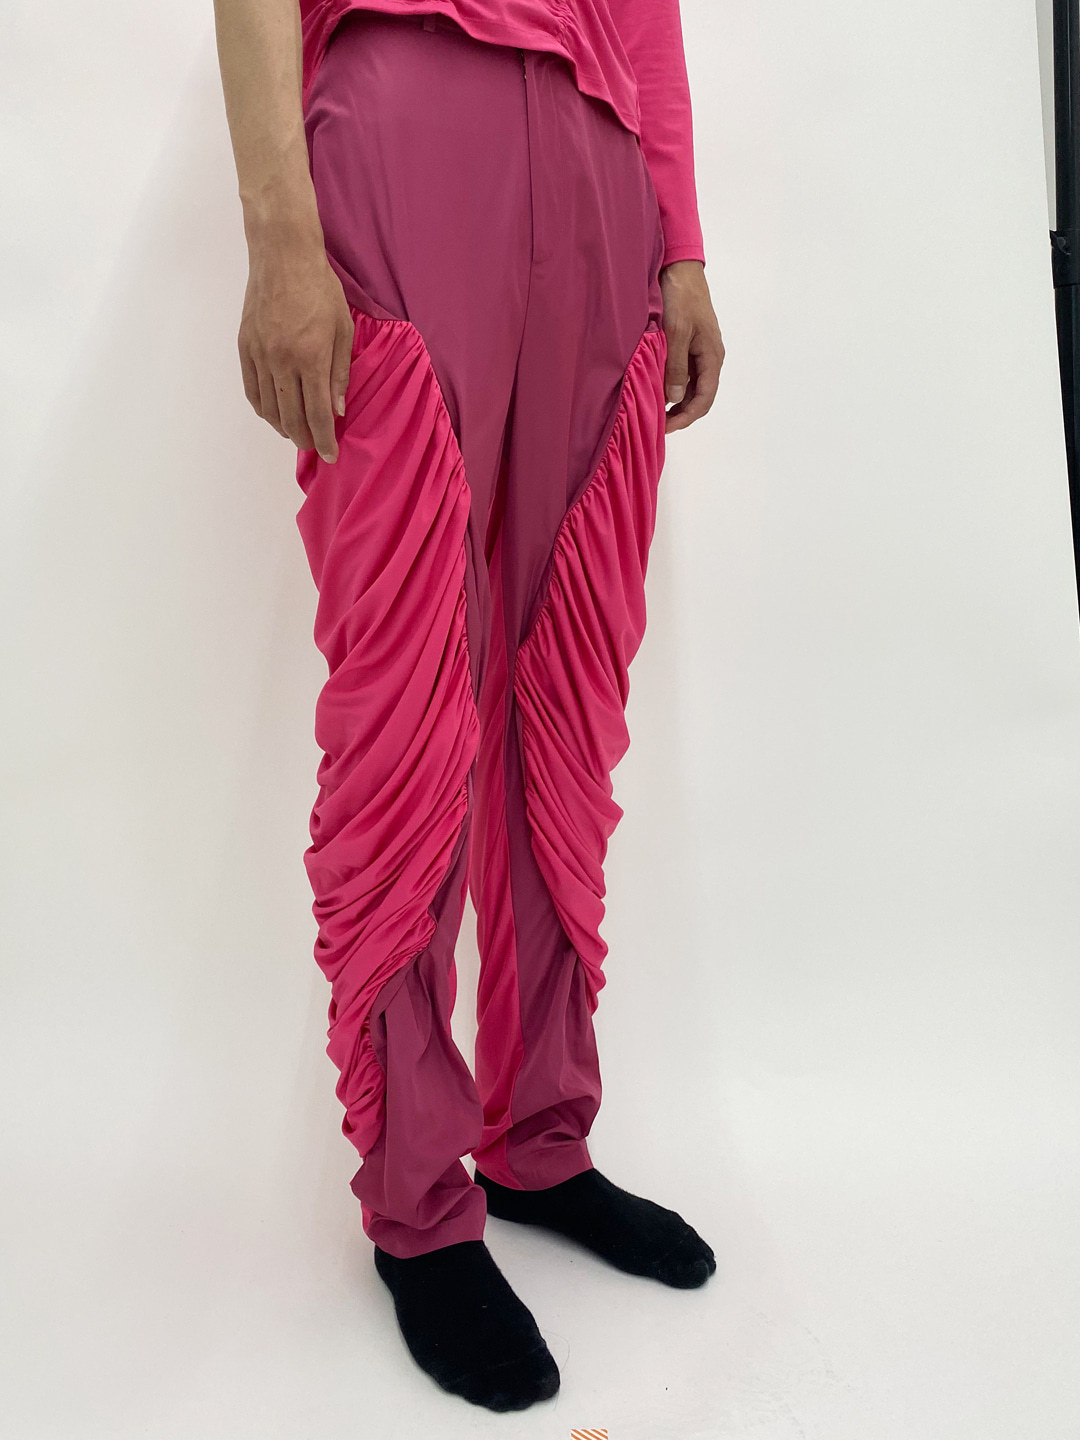 VioletRed Jazz Trousers